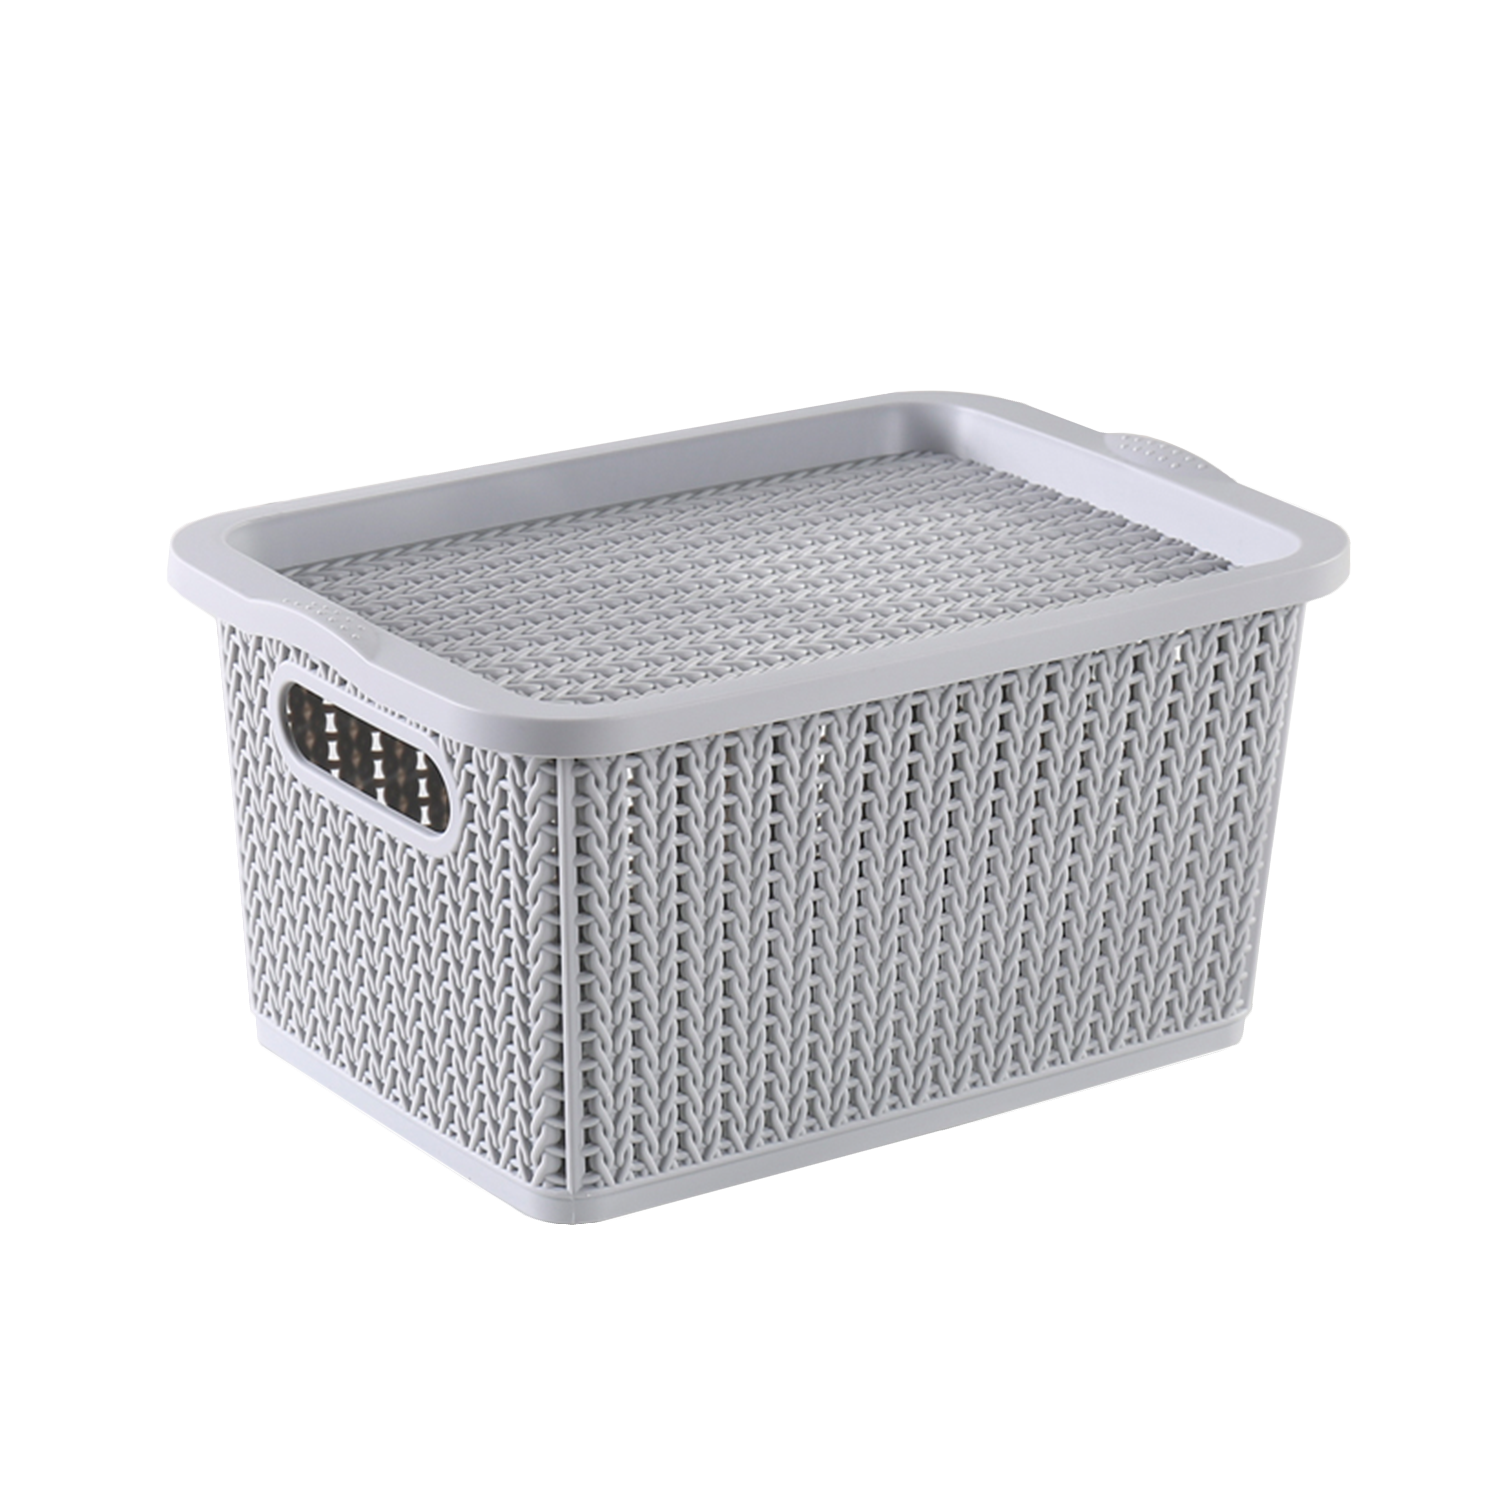 small storage basket with lid